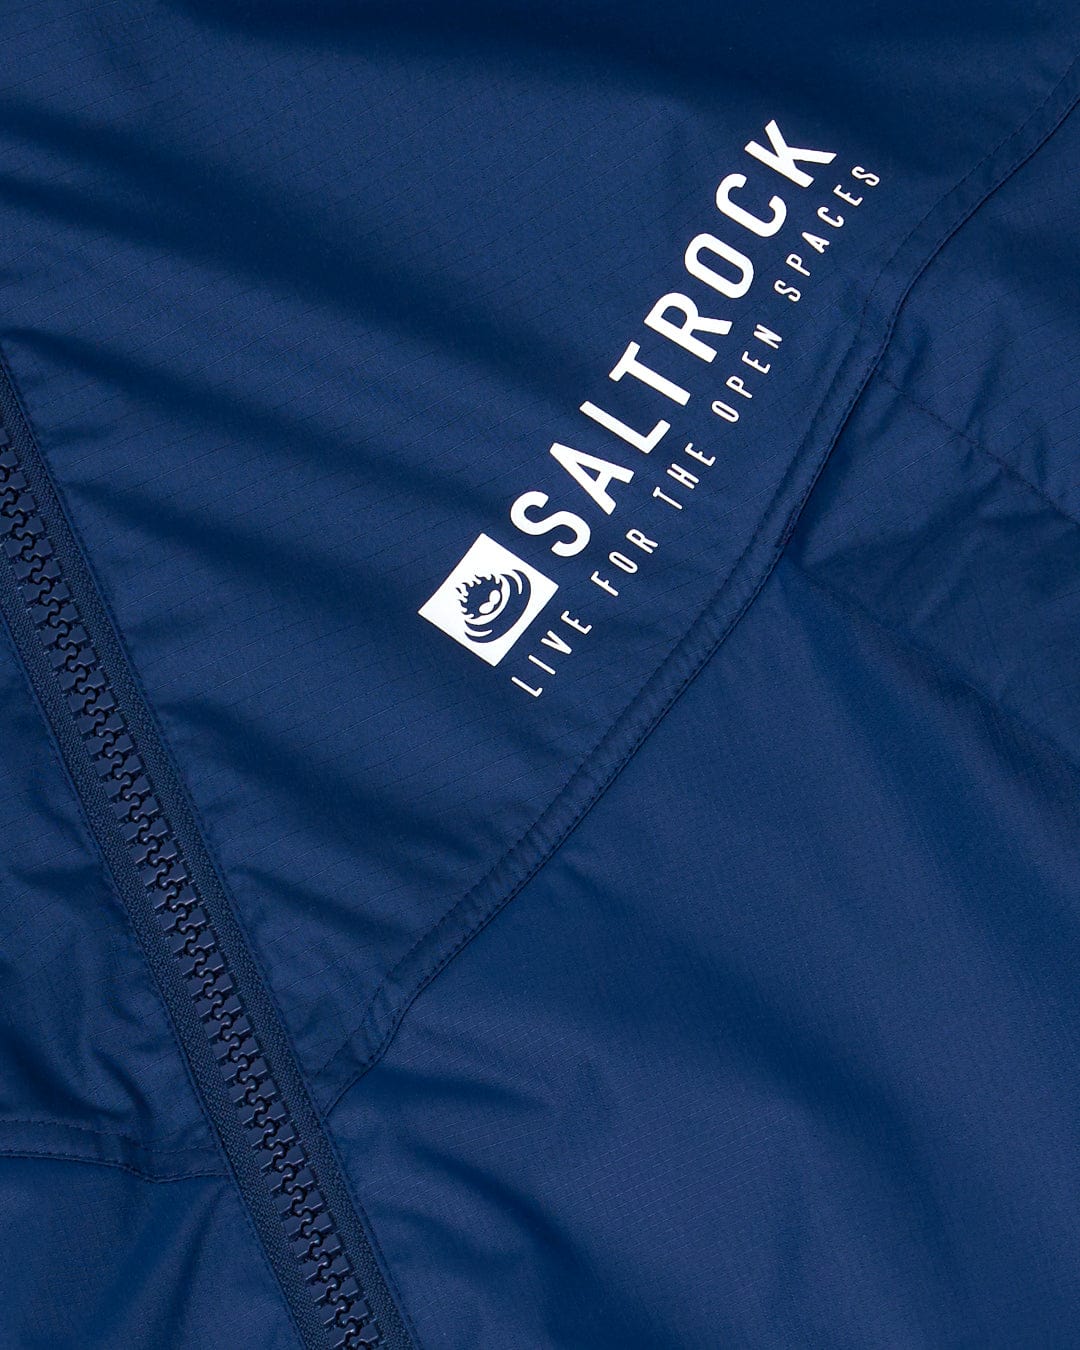 Close-up of a Saltrock Recycled Four Seasons Changing Robe - Blue with the brand logo and slogan visible.